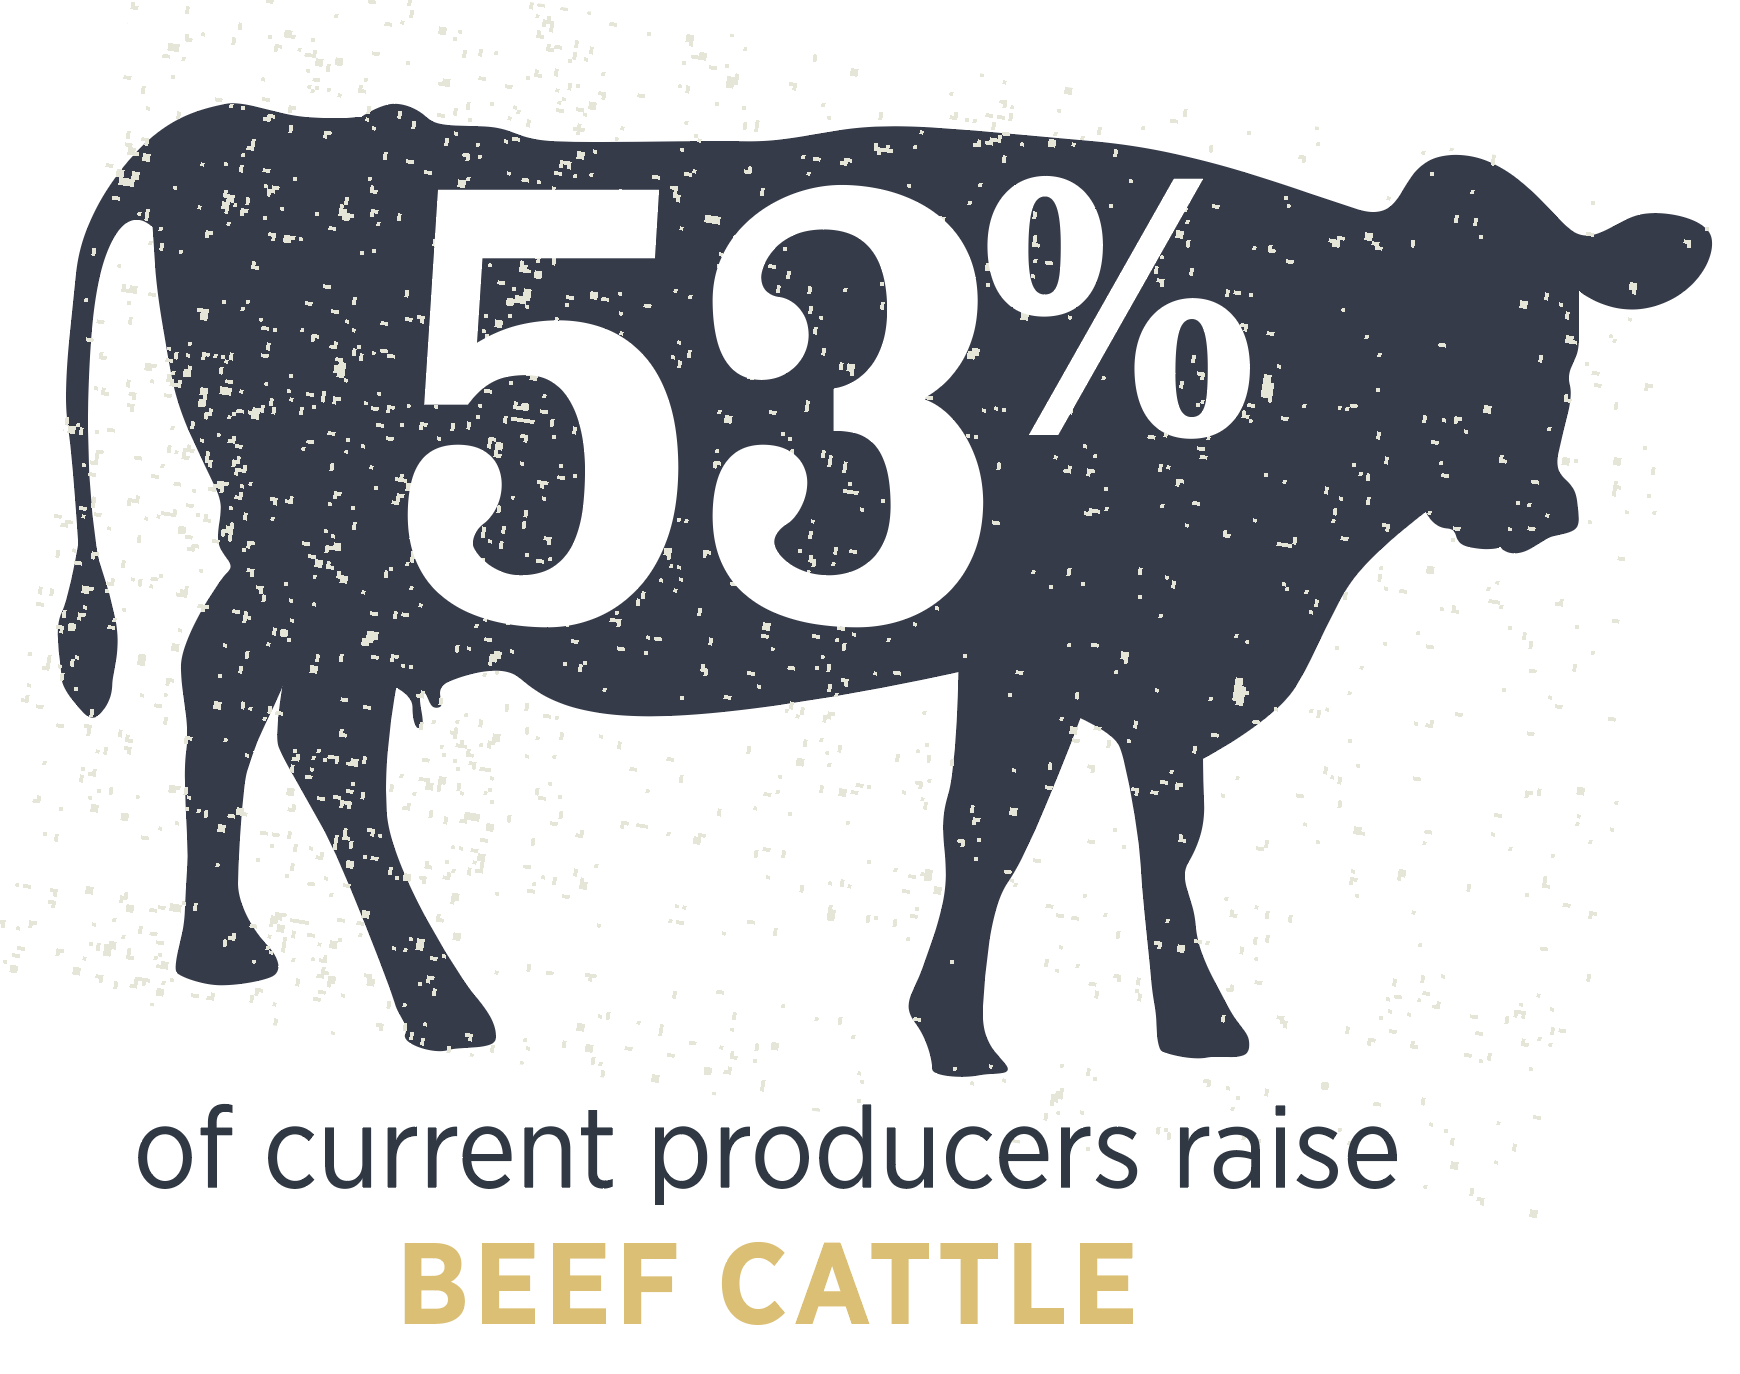 53% of current producers raise beef cattle.